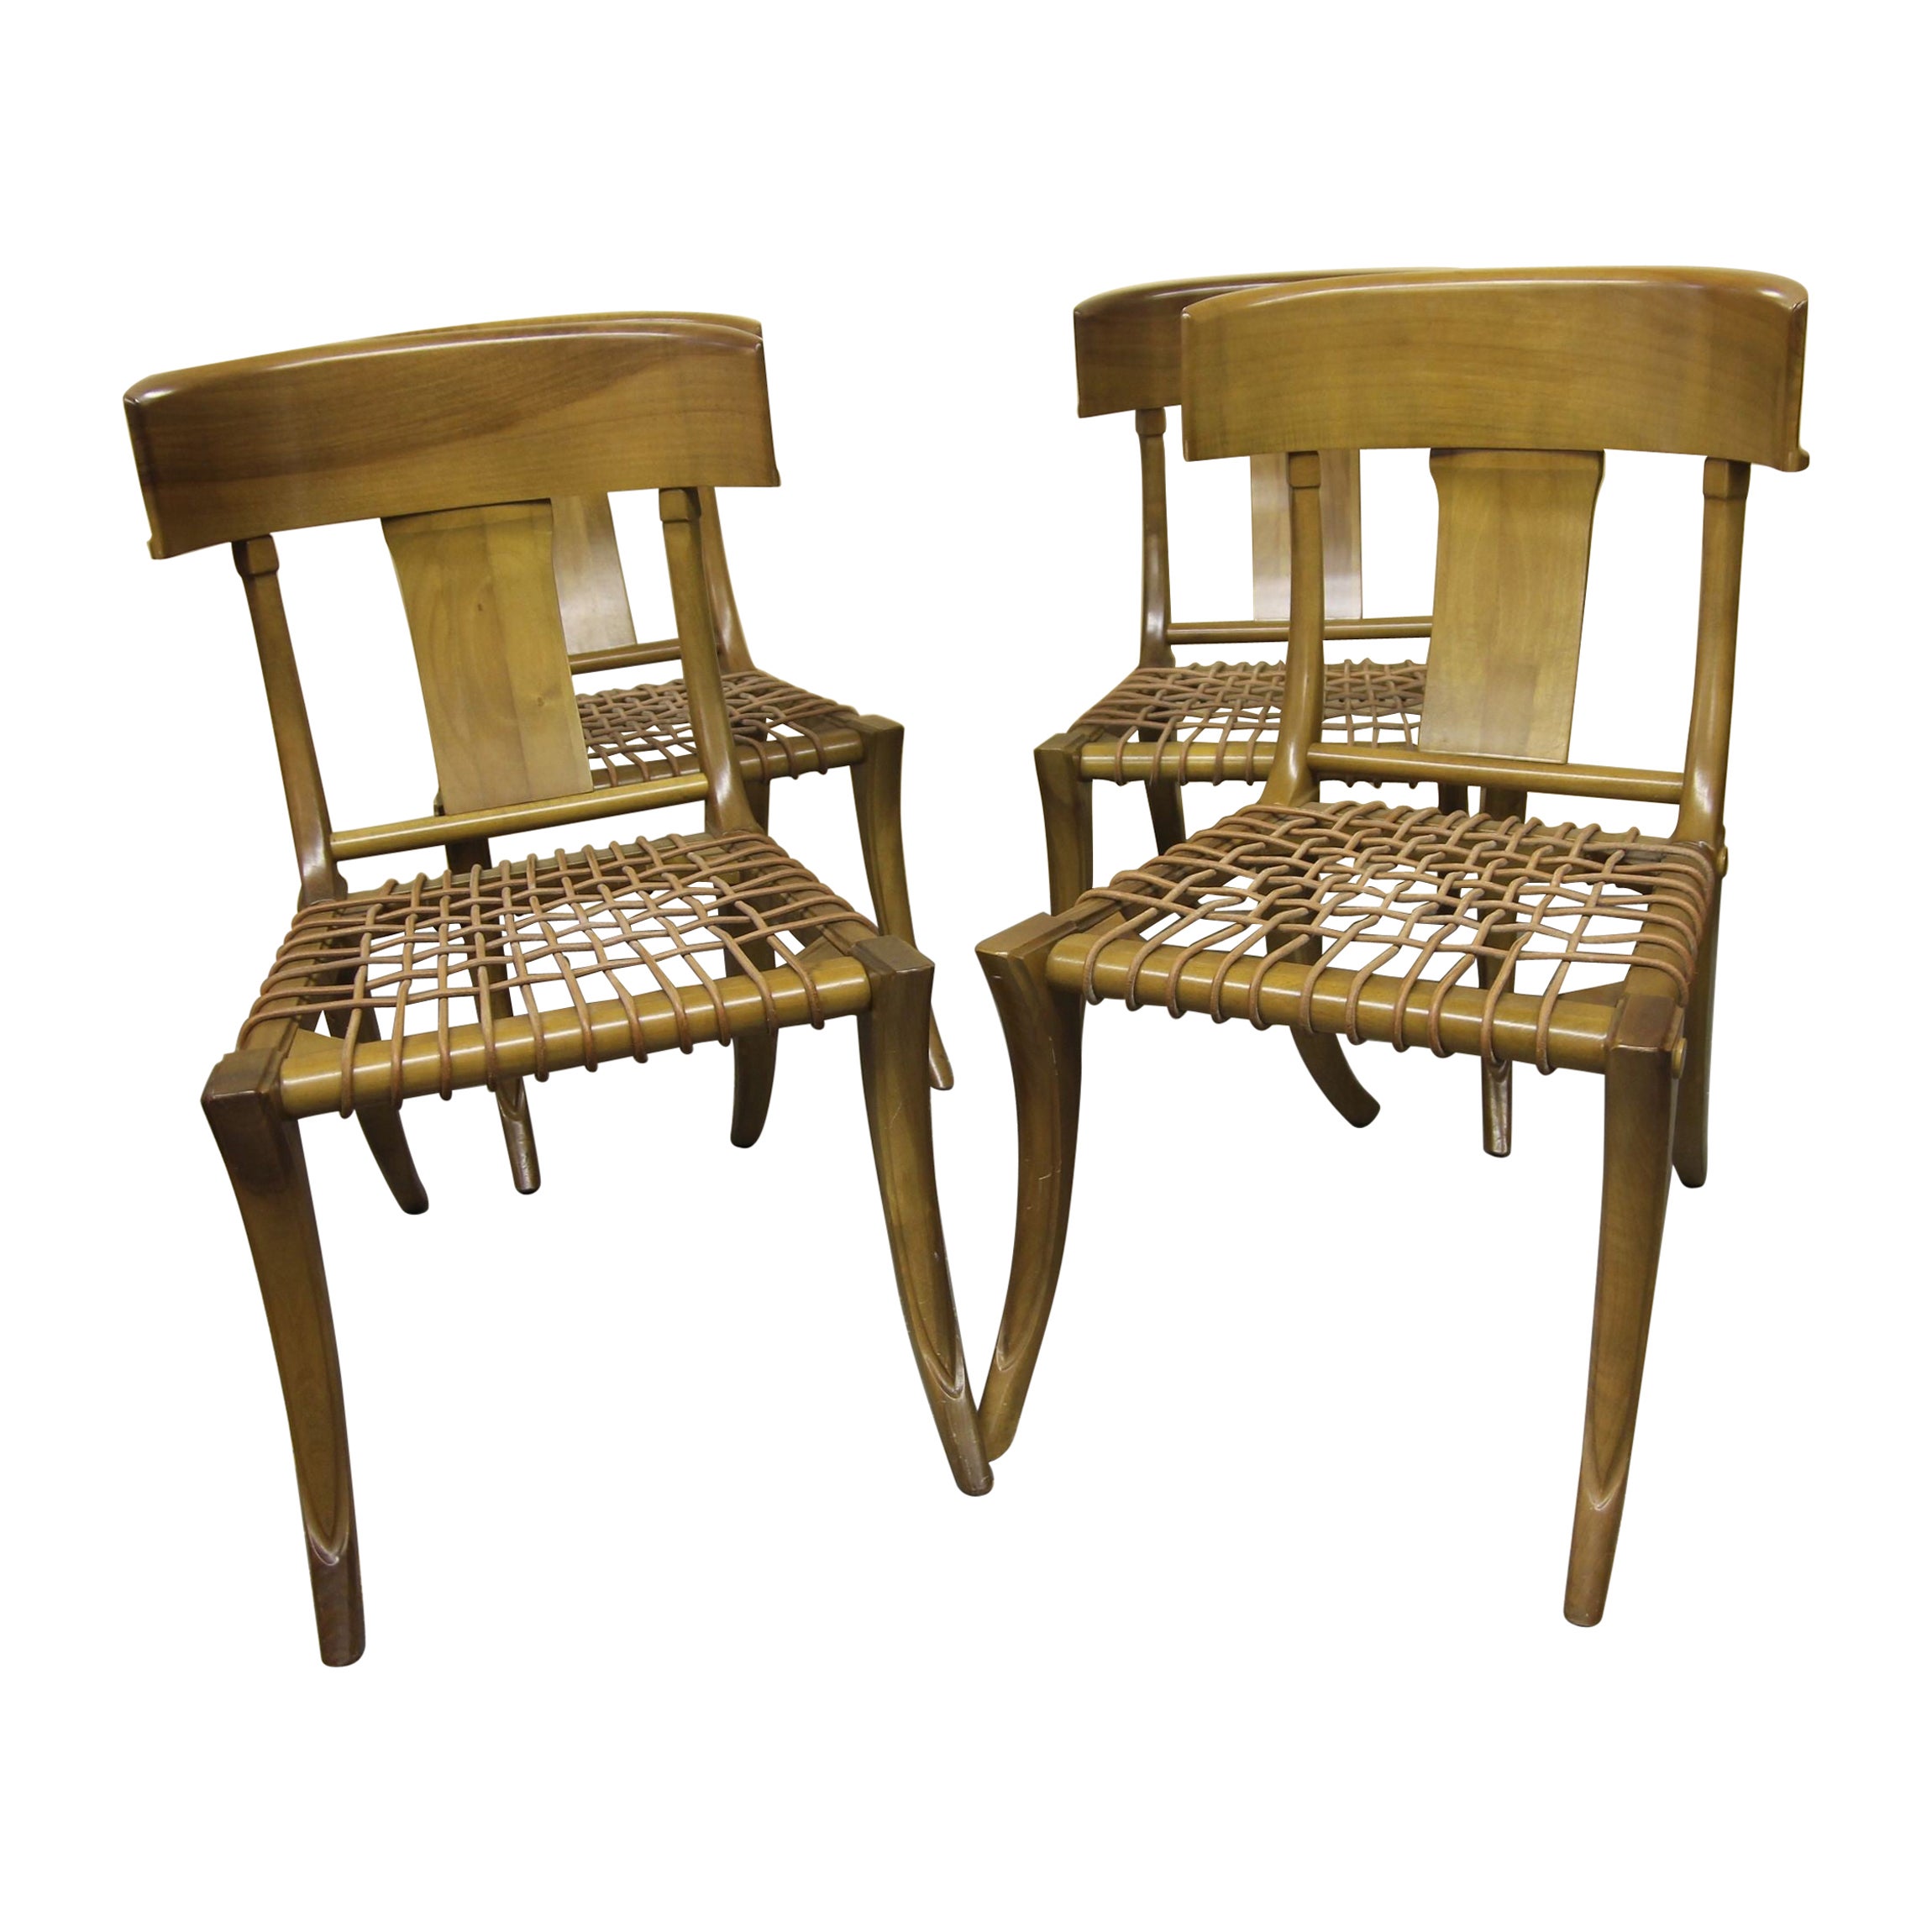 Kriess Klismo Chairs For Sale